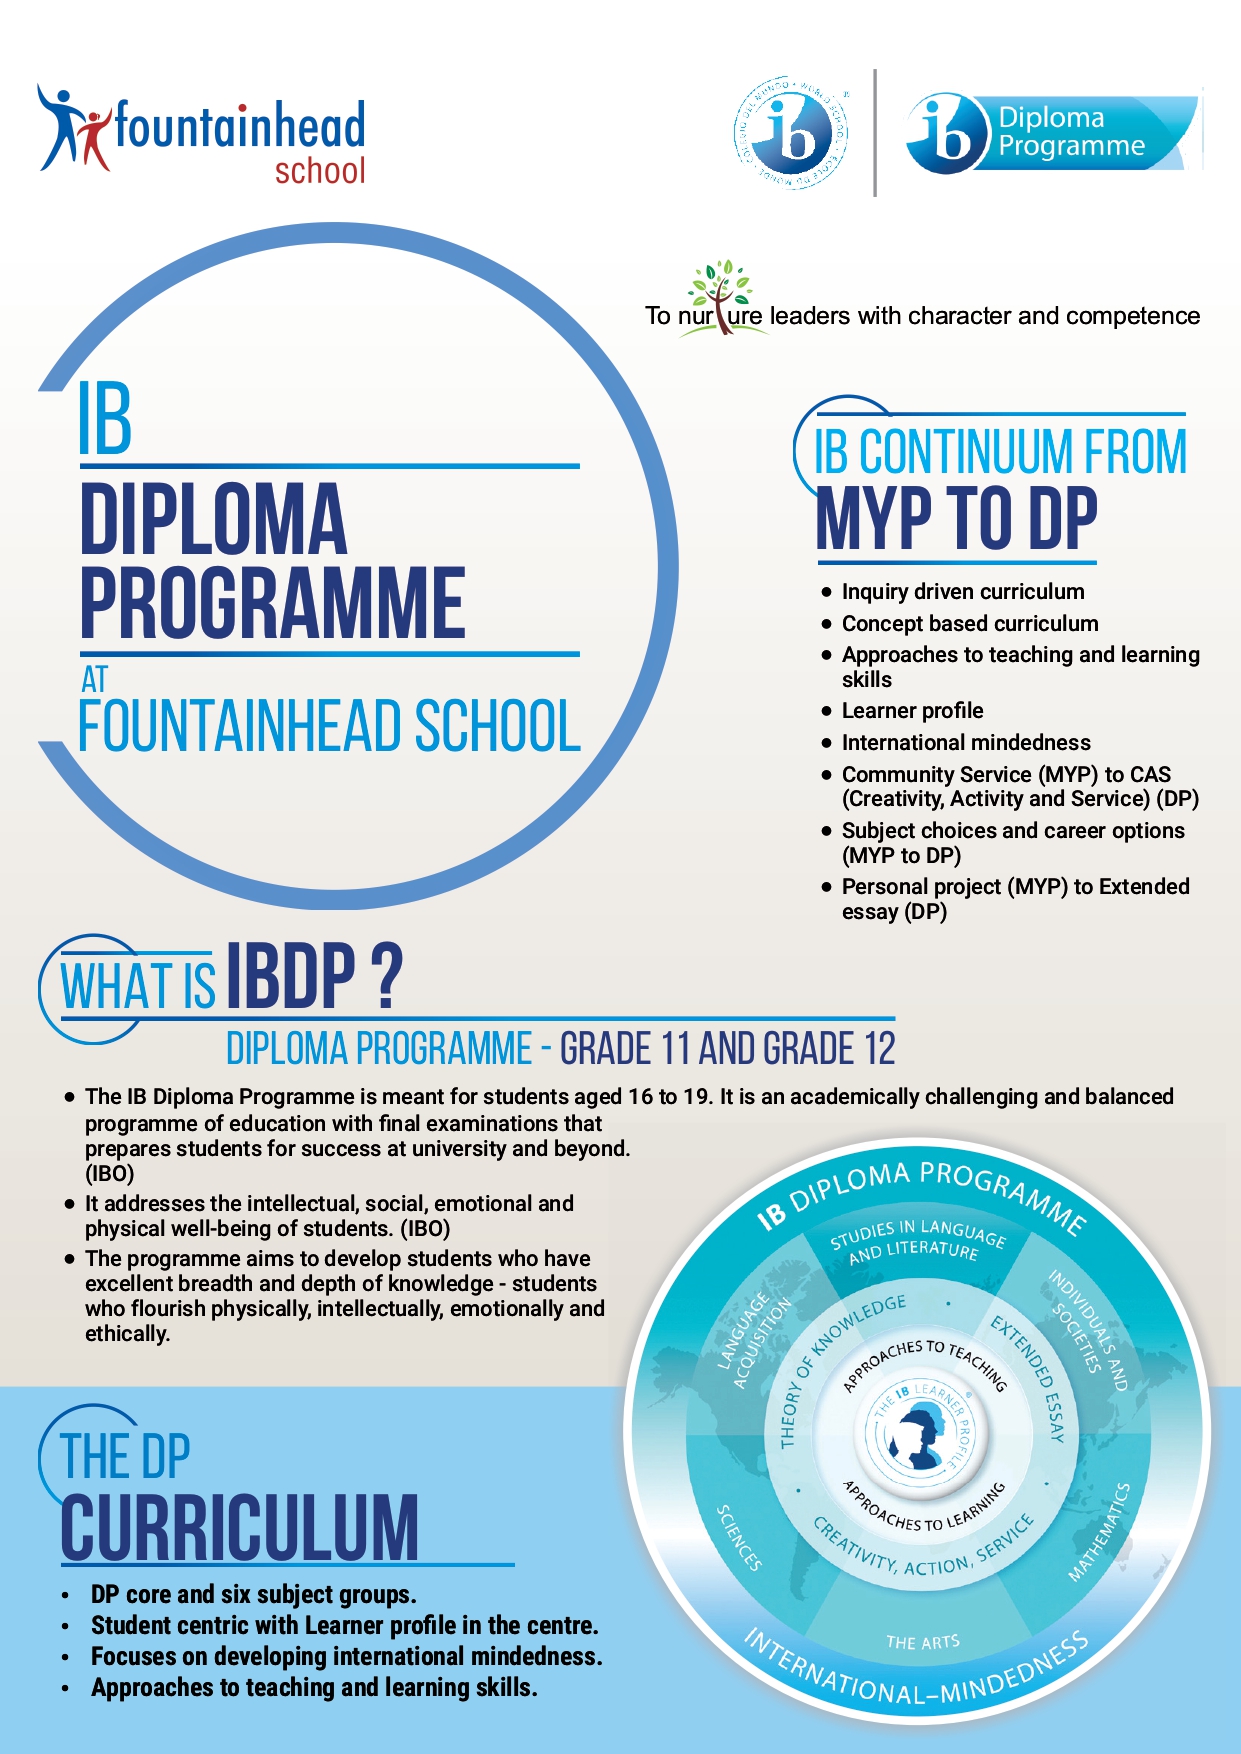 What Is IB Diploma Programme